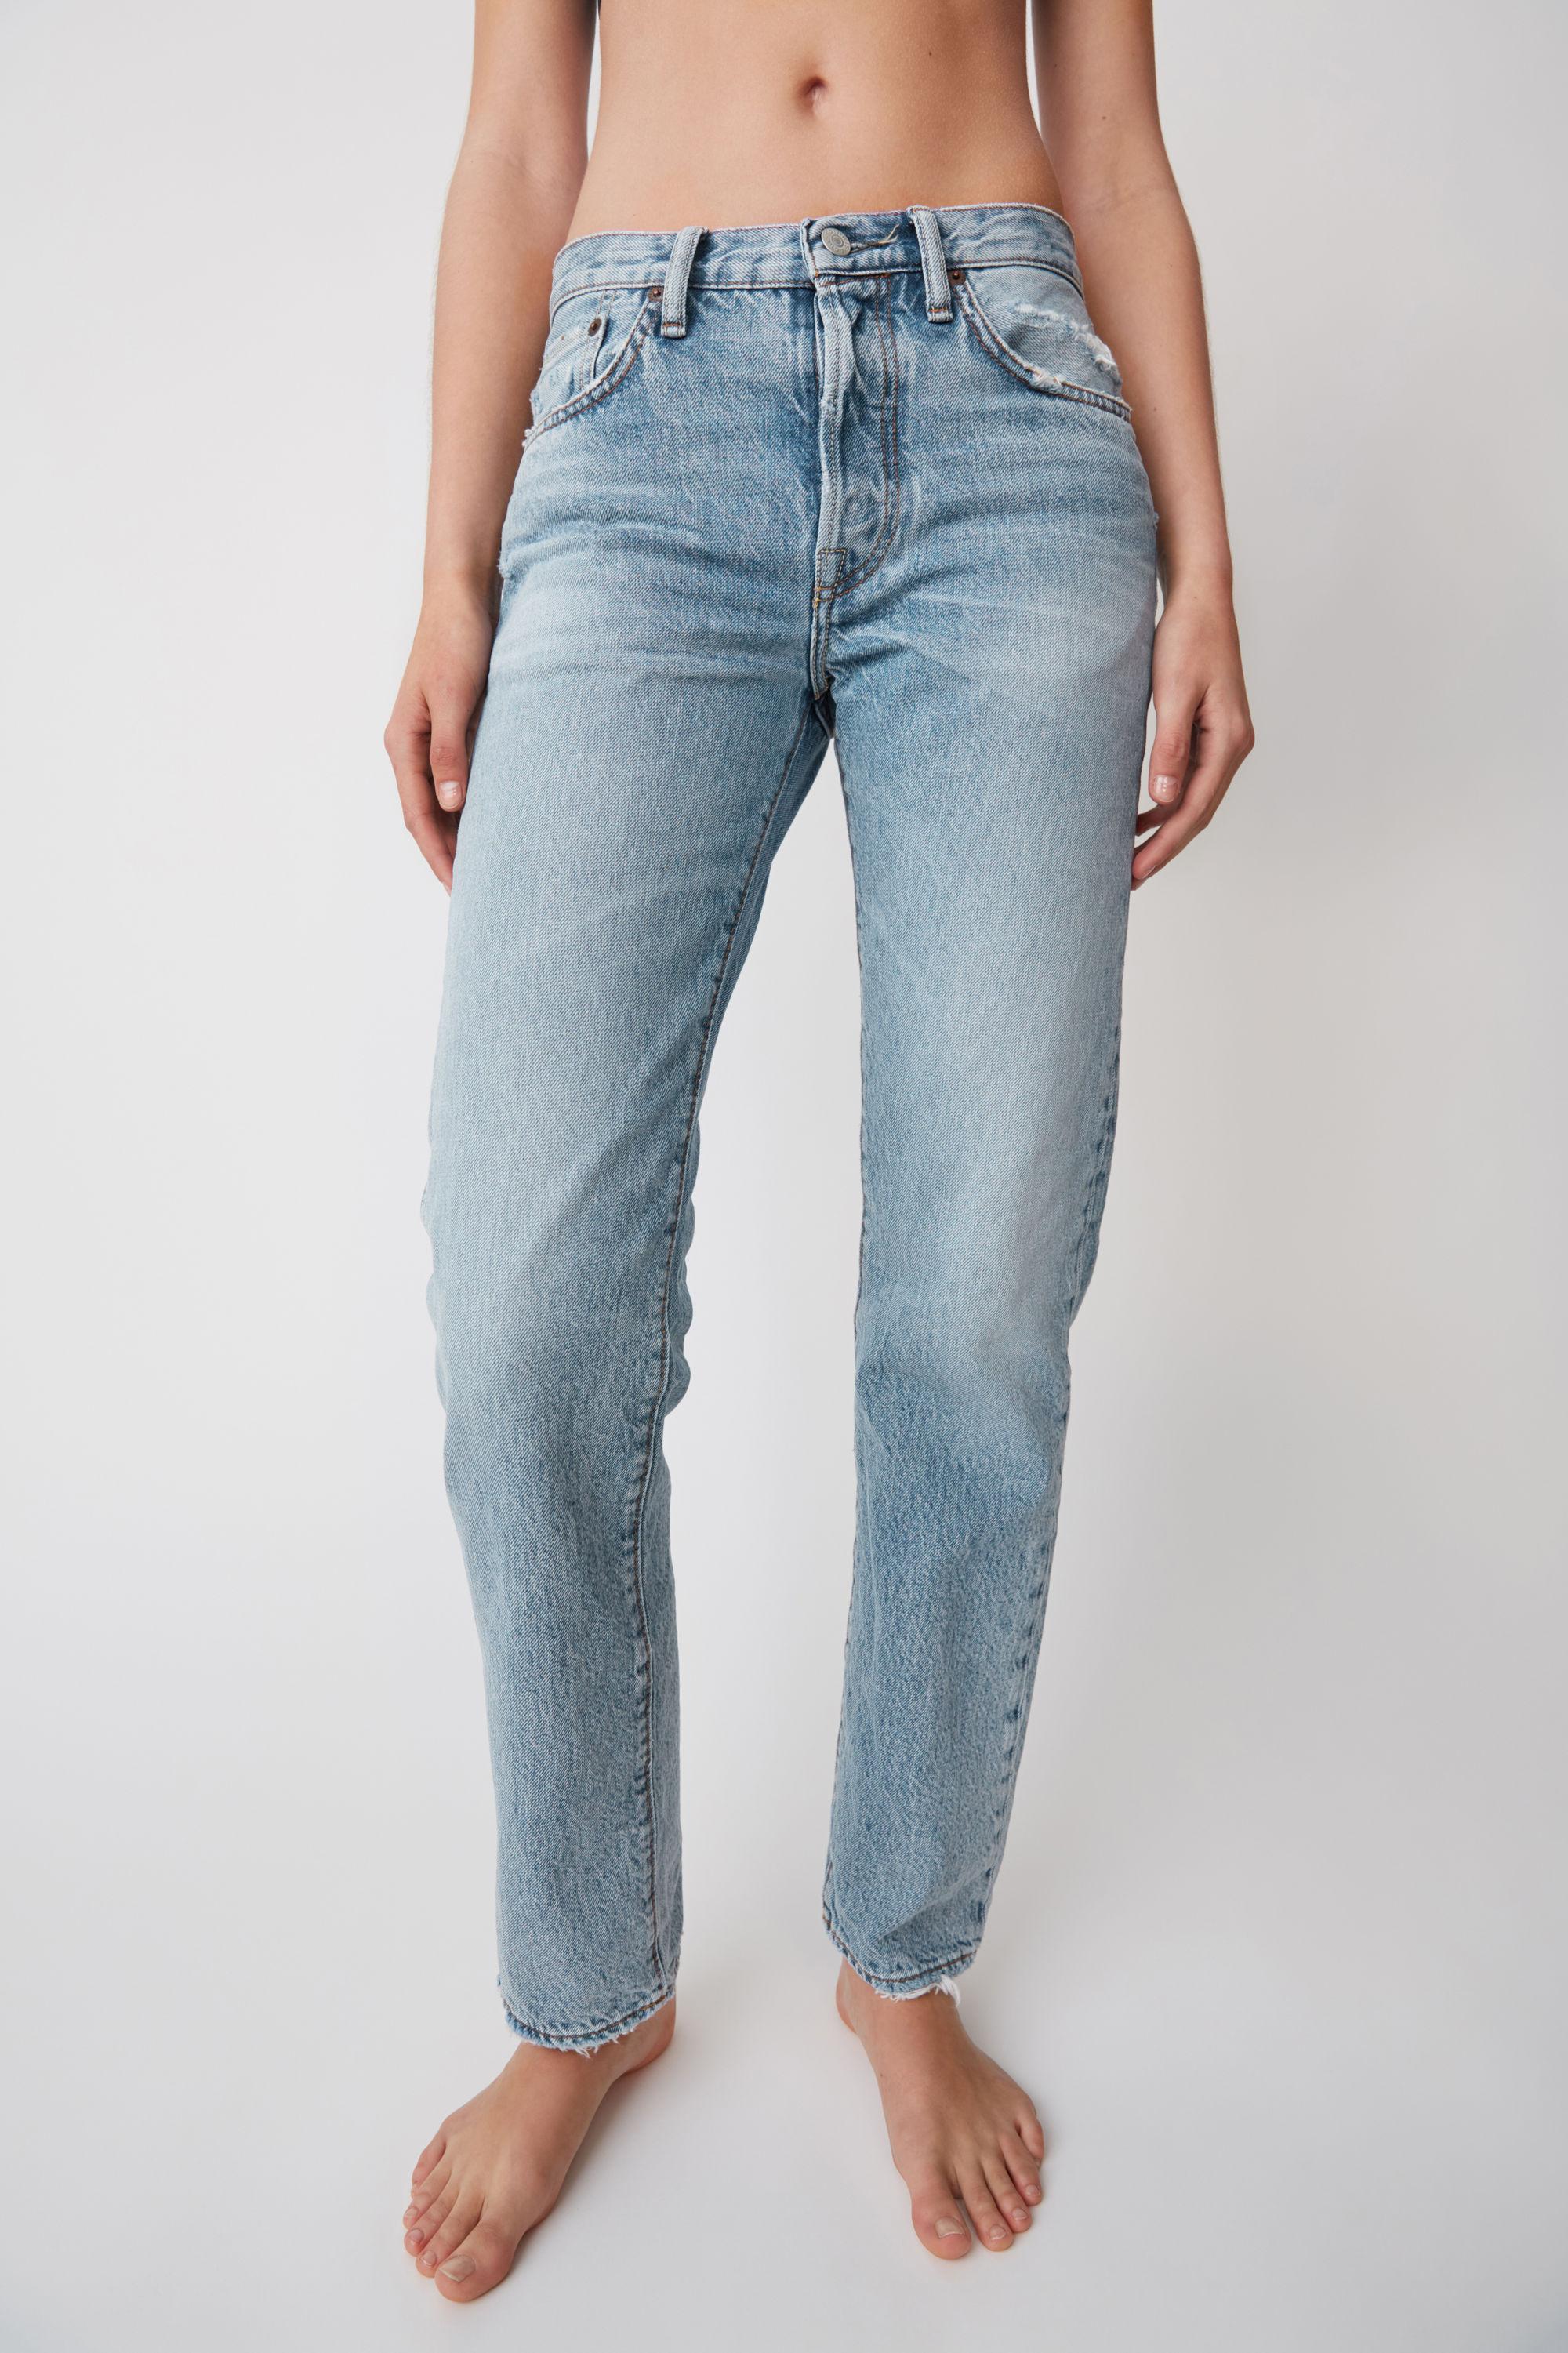 Acne Studios 1997 Trash 2 Classic Fit Jeans in Blue | Lyst